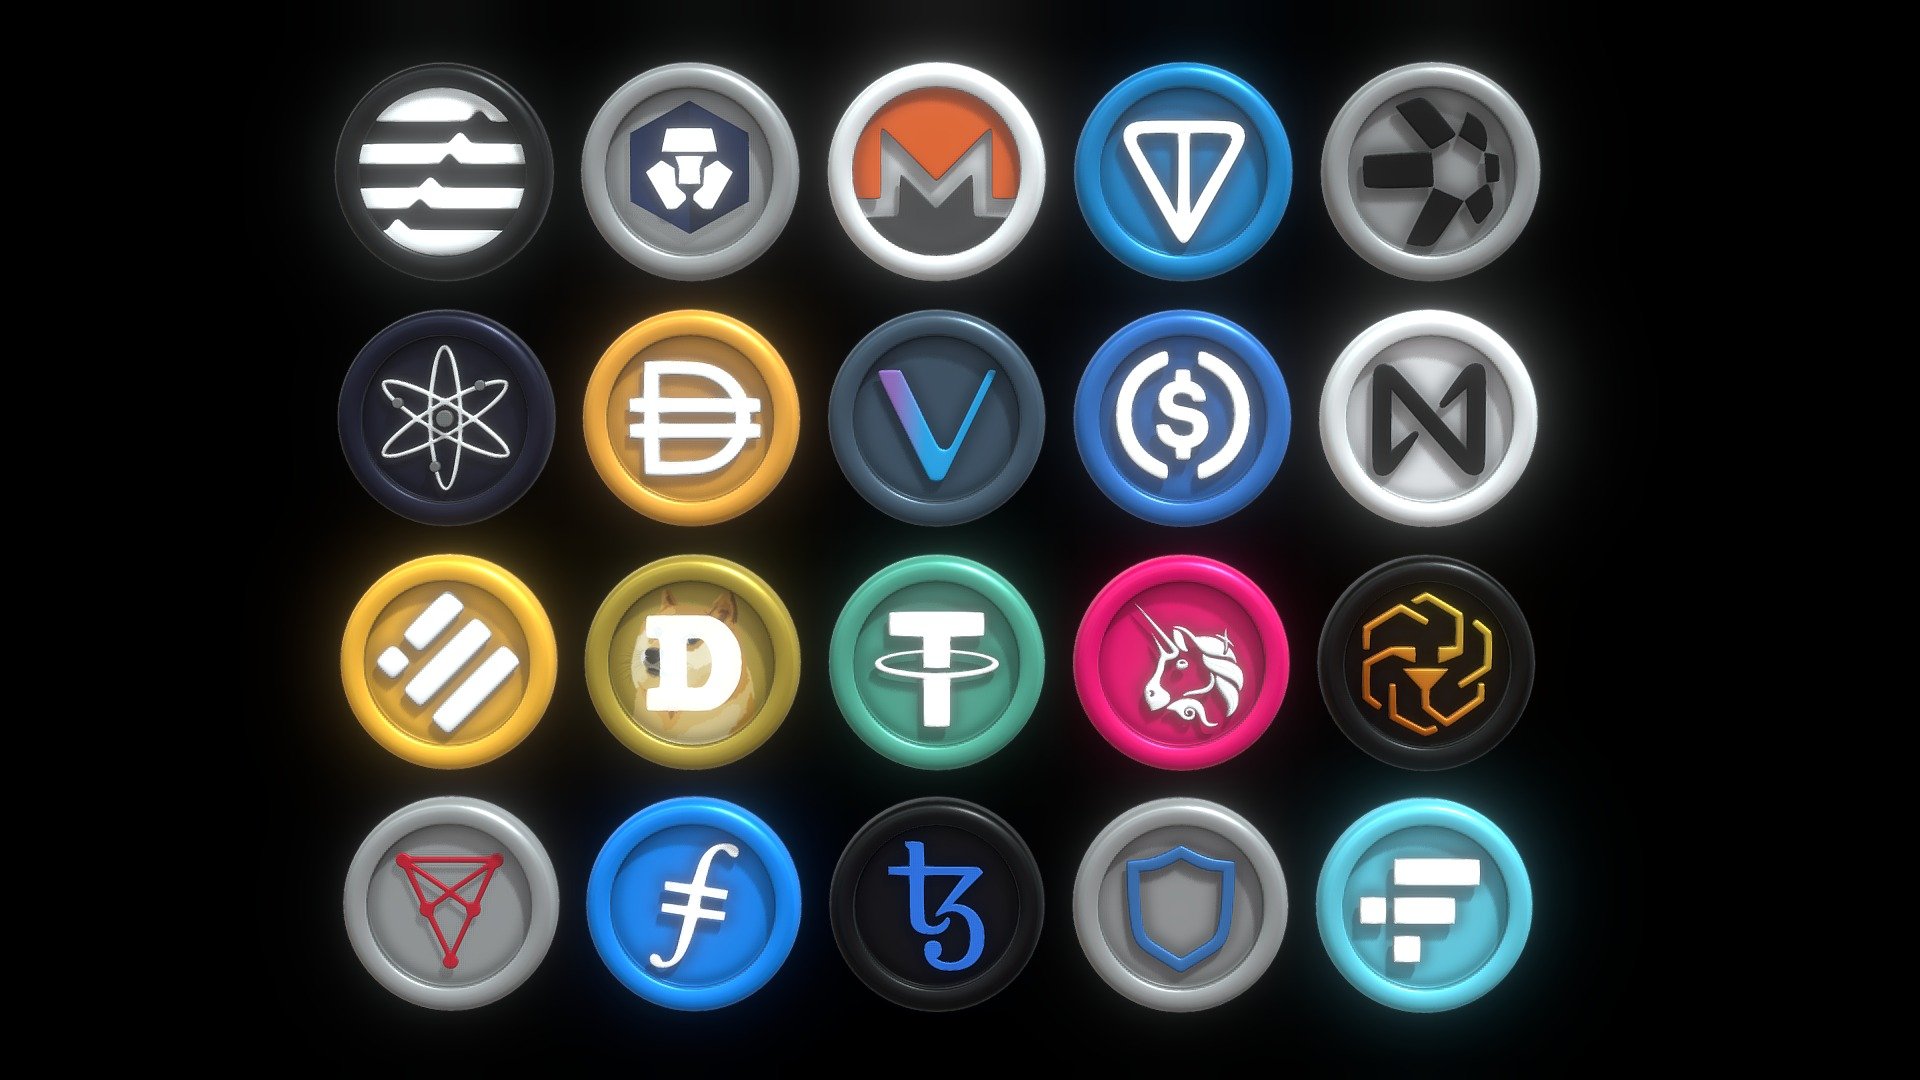 3D 20 Cryptocurrency coin pack with cartoon style Part 2 Made in Blender 3.3.1

Coin List :




USDT

USDC

APT

FTT

UNI

BUSD

ATOM

LEO

CRO

DAI

XMR

NEAR

TON

QNT

VET

FIL

TWT

CHZ

XTZ

DOGE

All of This model does include a TEXTURE, DIFFUSE, METALLIC, AND ROUGHNESS MAP (OPACITY MAP for DOGE), but if you want to change the color you can change it in the blend file (Backup Collection), just use the principled bsdf and play with the Roughness, Metallic, and Base Color parameter.

in the blender file, i just included the lighting setting for rendering just like the preview image 3d model